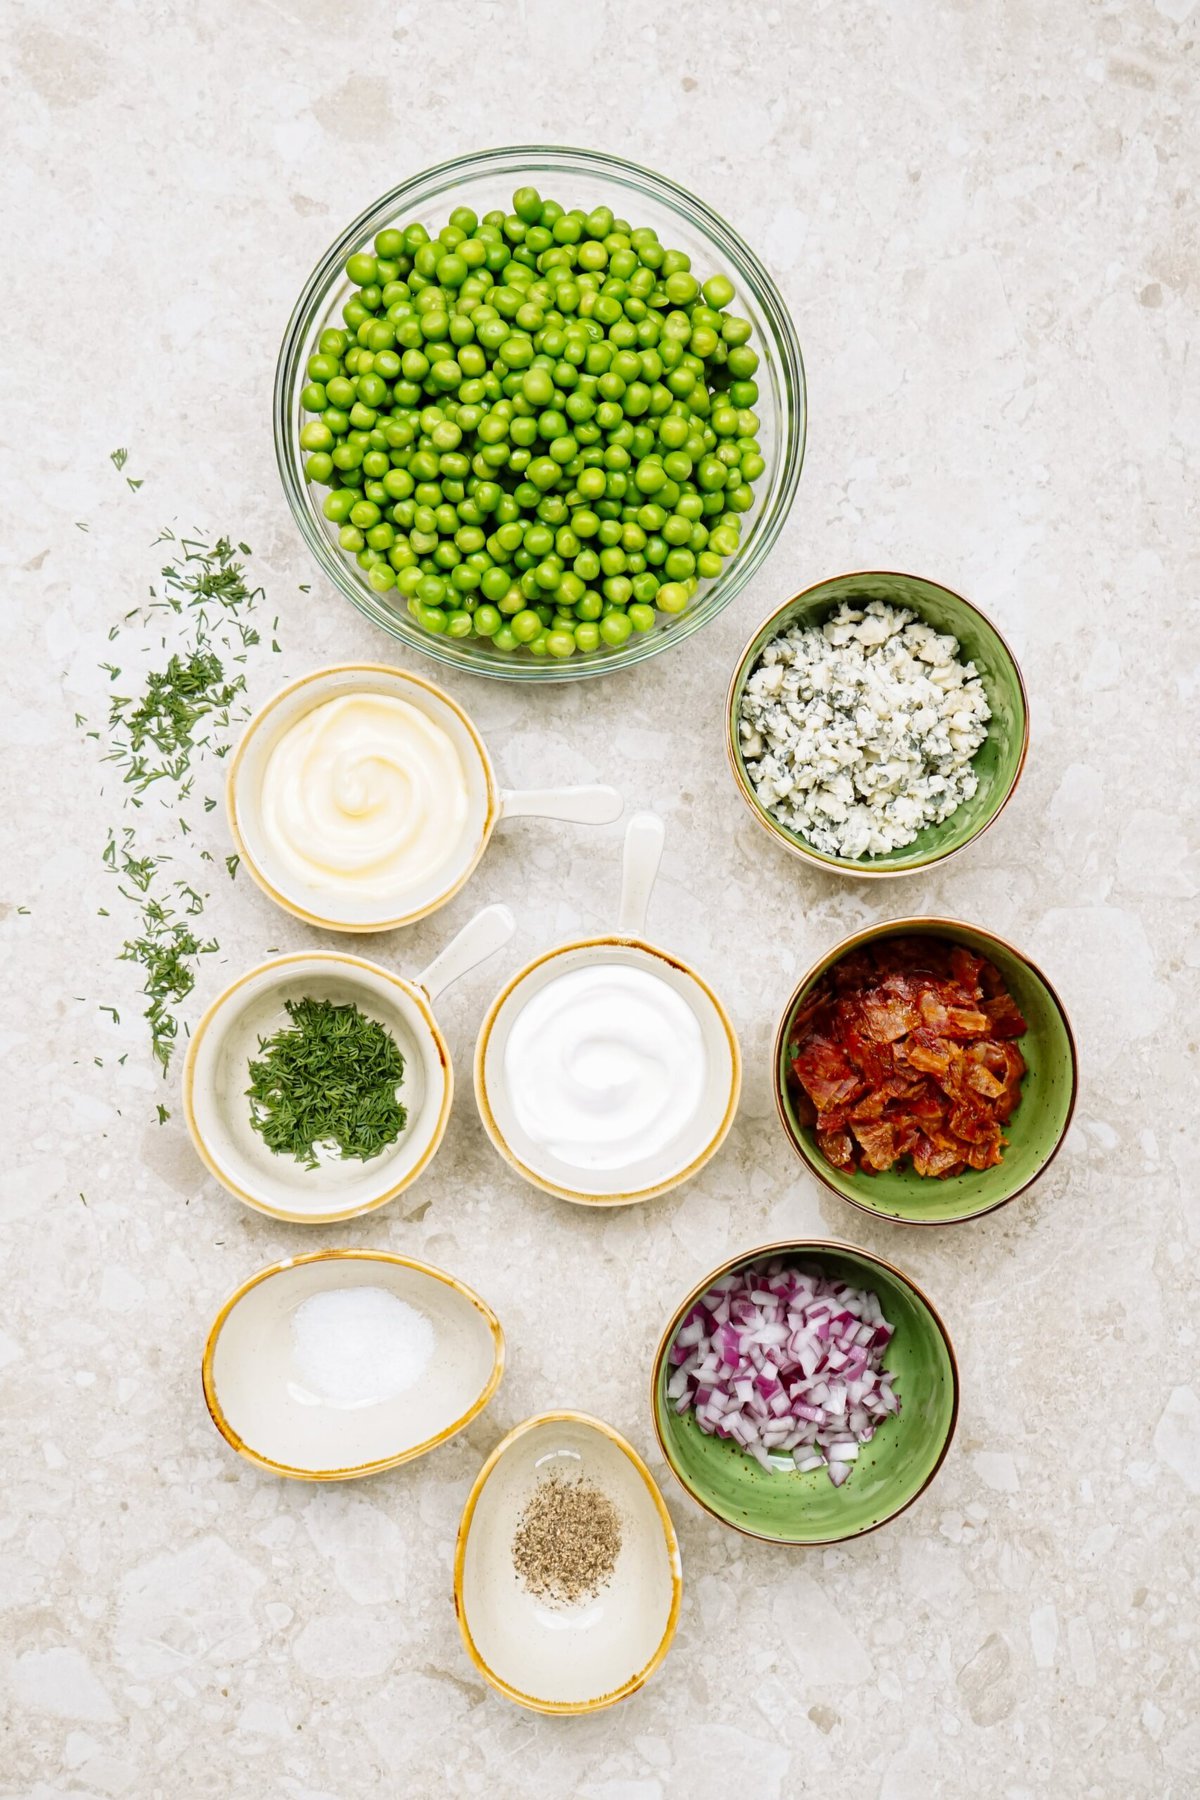 Assorted ingredients for a pea salad recipe arranged neatly on a light surface, including green peas, herbs, dairy products, and seasonings.